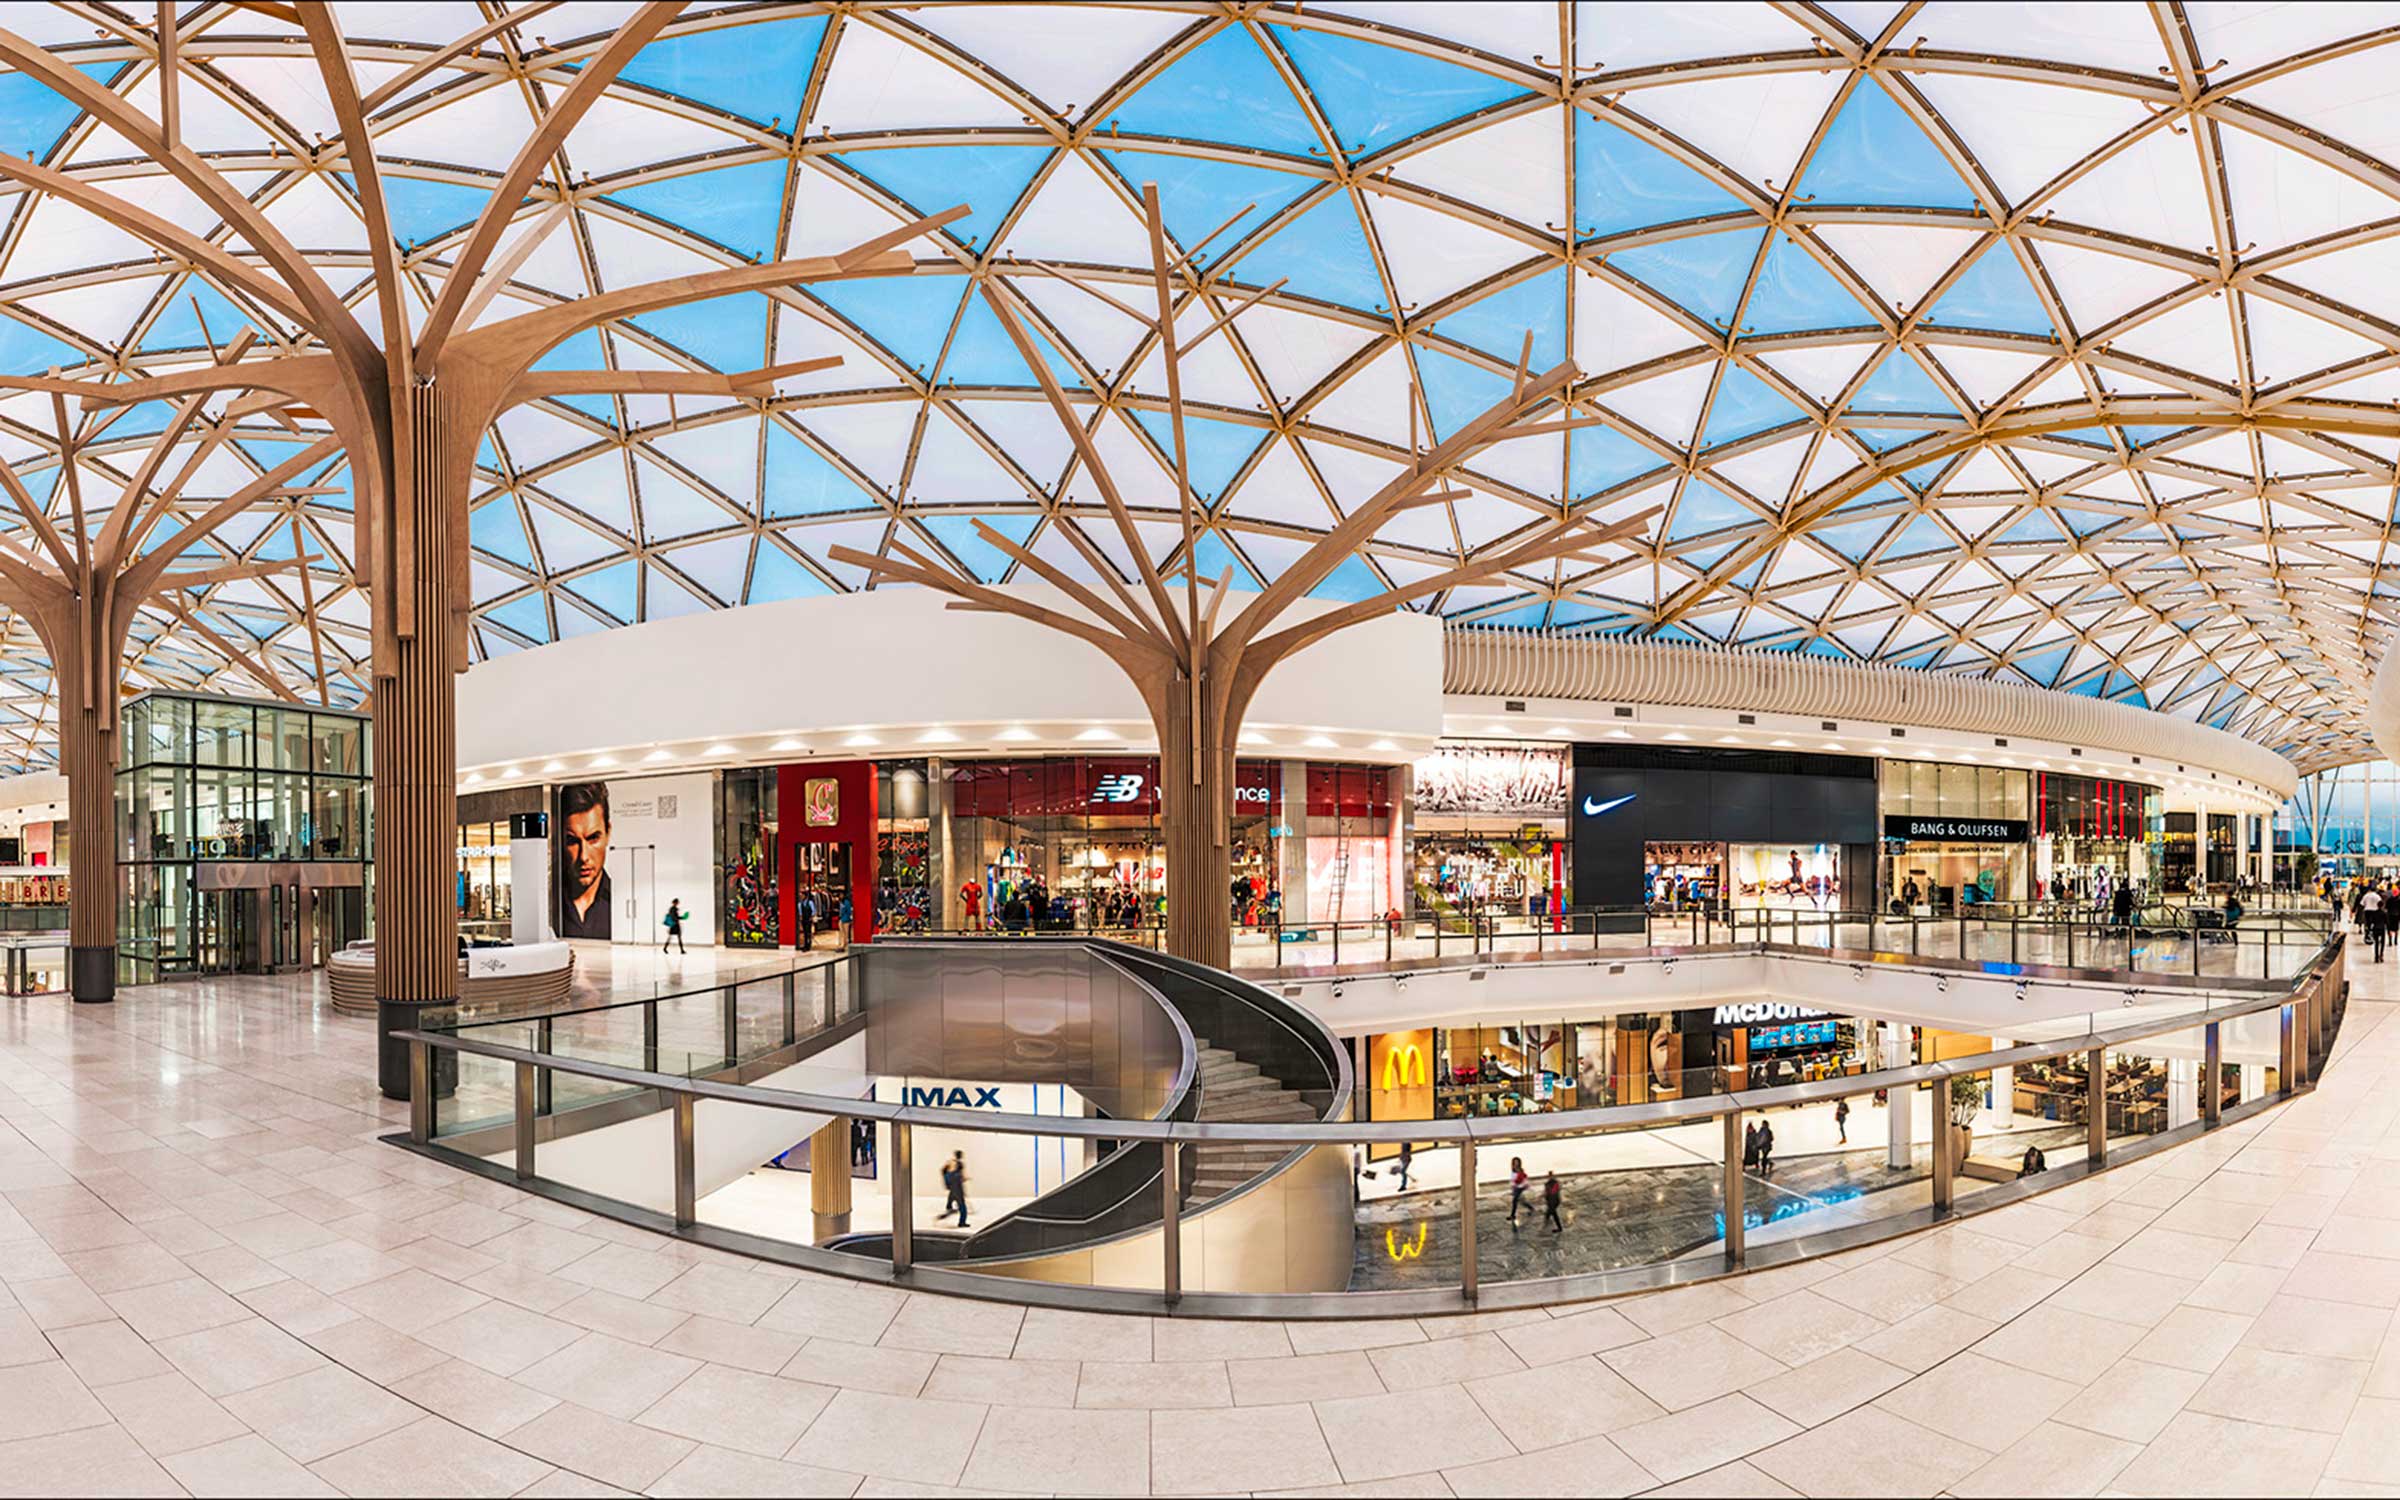 Mall interior showing roof cladding panels and roof support structures (novumstructures.com)